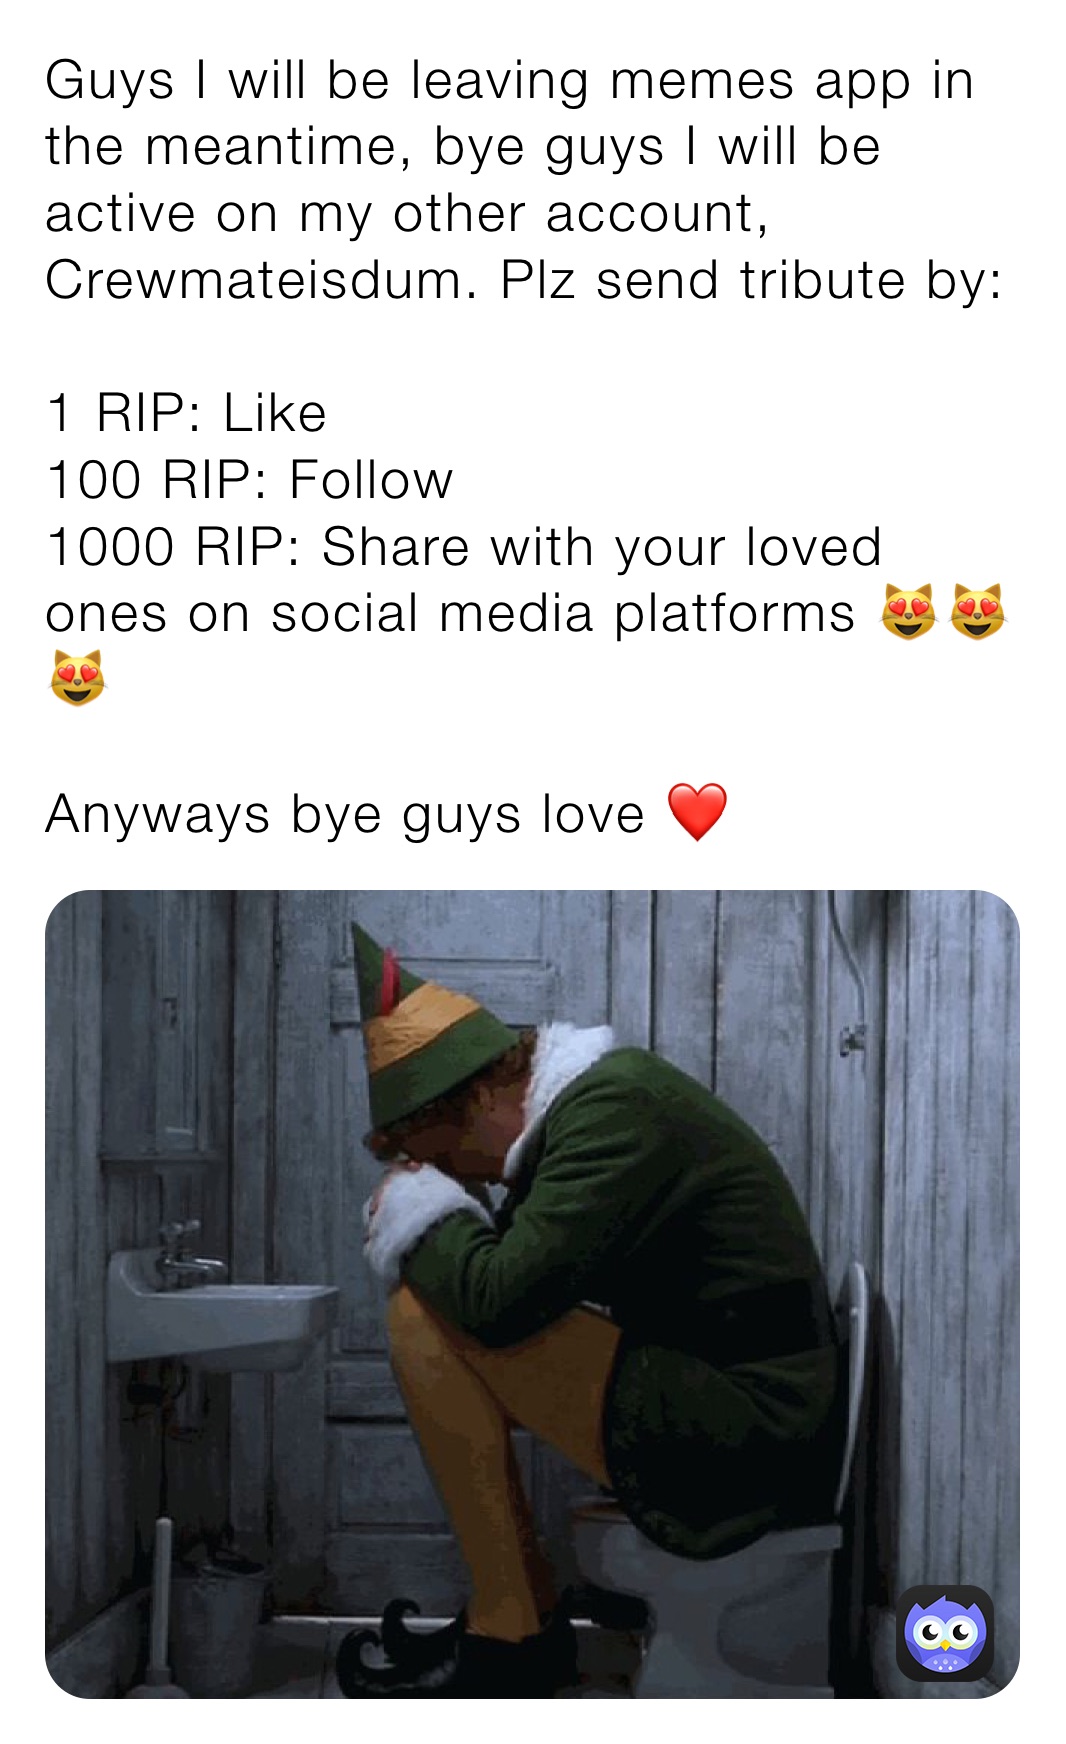 Guys I will be leaving memes app in the meantime, bye guys I will be active on my other account, Crewmateisdum. Plz send tribute by:

1 RIP: Like
100 RIP: Follow
1000 RIP: Share with your loved ones on social media platforms 😻😻😻 

Anyways bye guys love ❤️